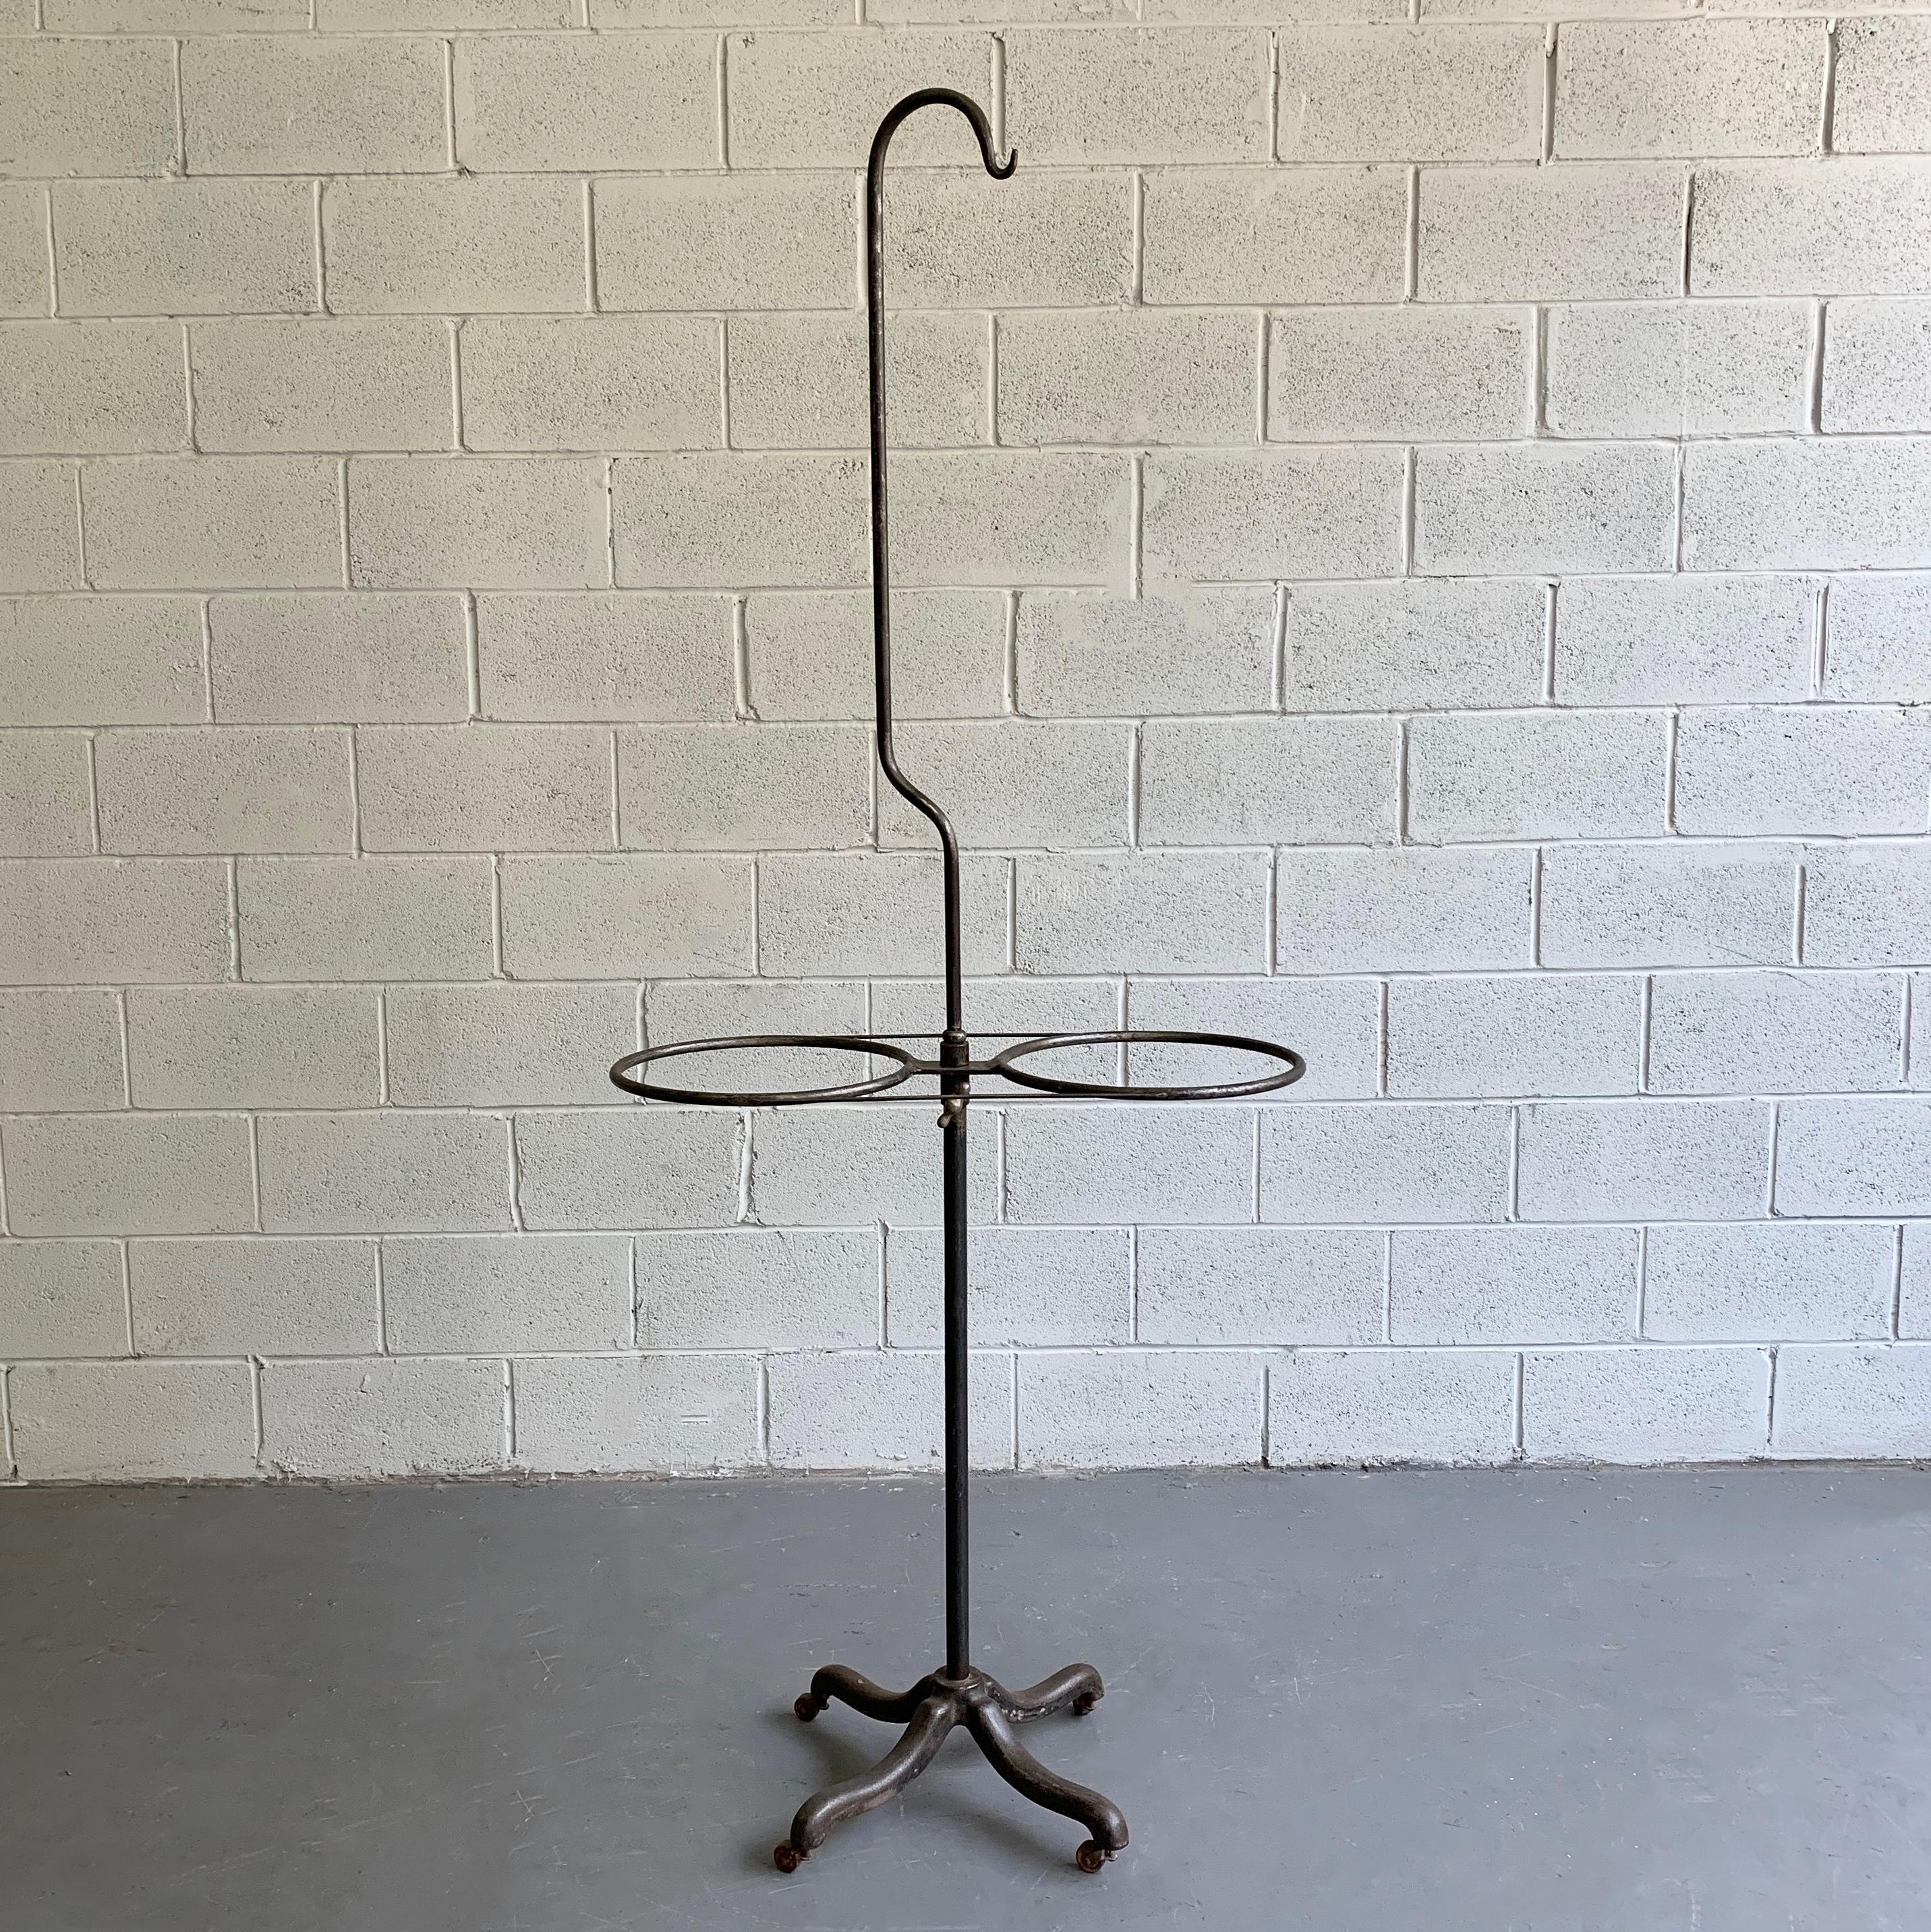 Early 20th century, industrial, brushed steel, hospital, transfusion rolling rack features 2 tray holders at 34.5 inches height. This handsome, antique rack is very utilitarian and can be repurposed for multiple uses.